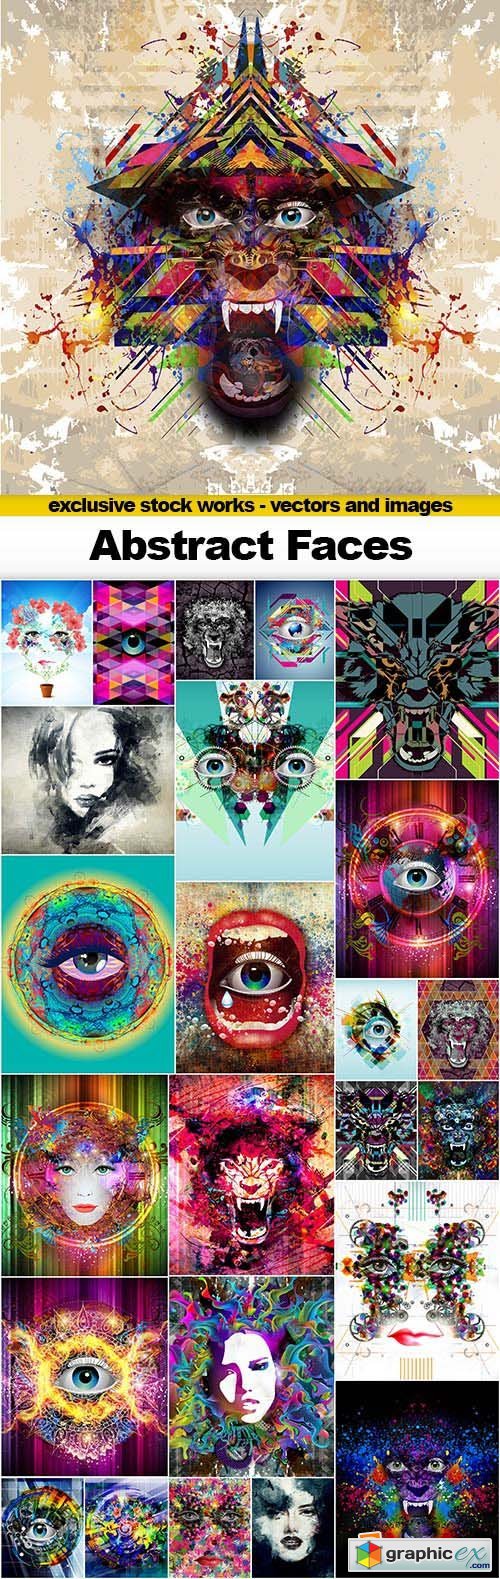 Abstract Faces - 25x JPEGs